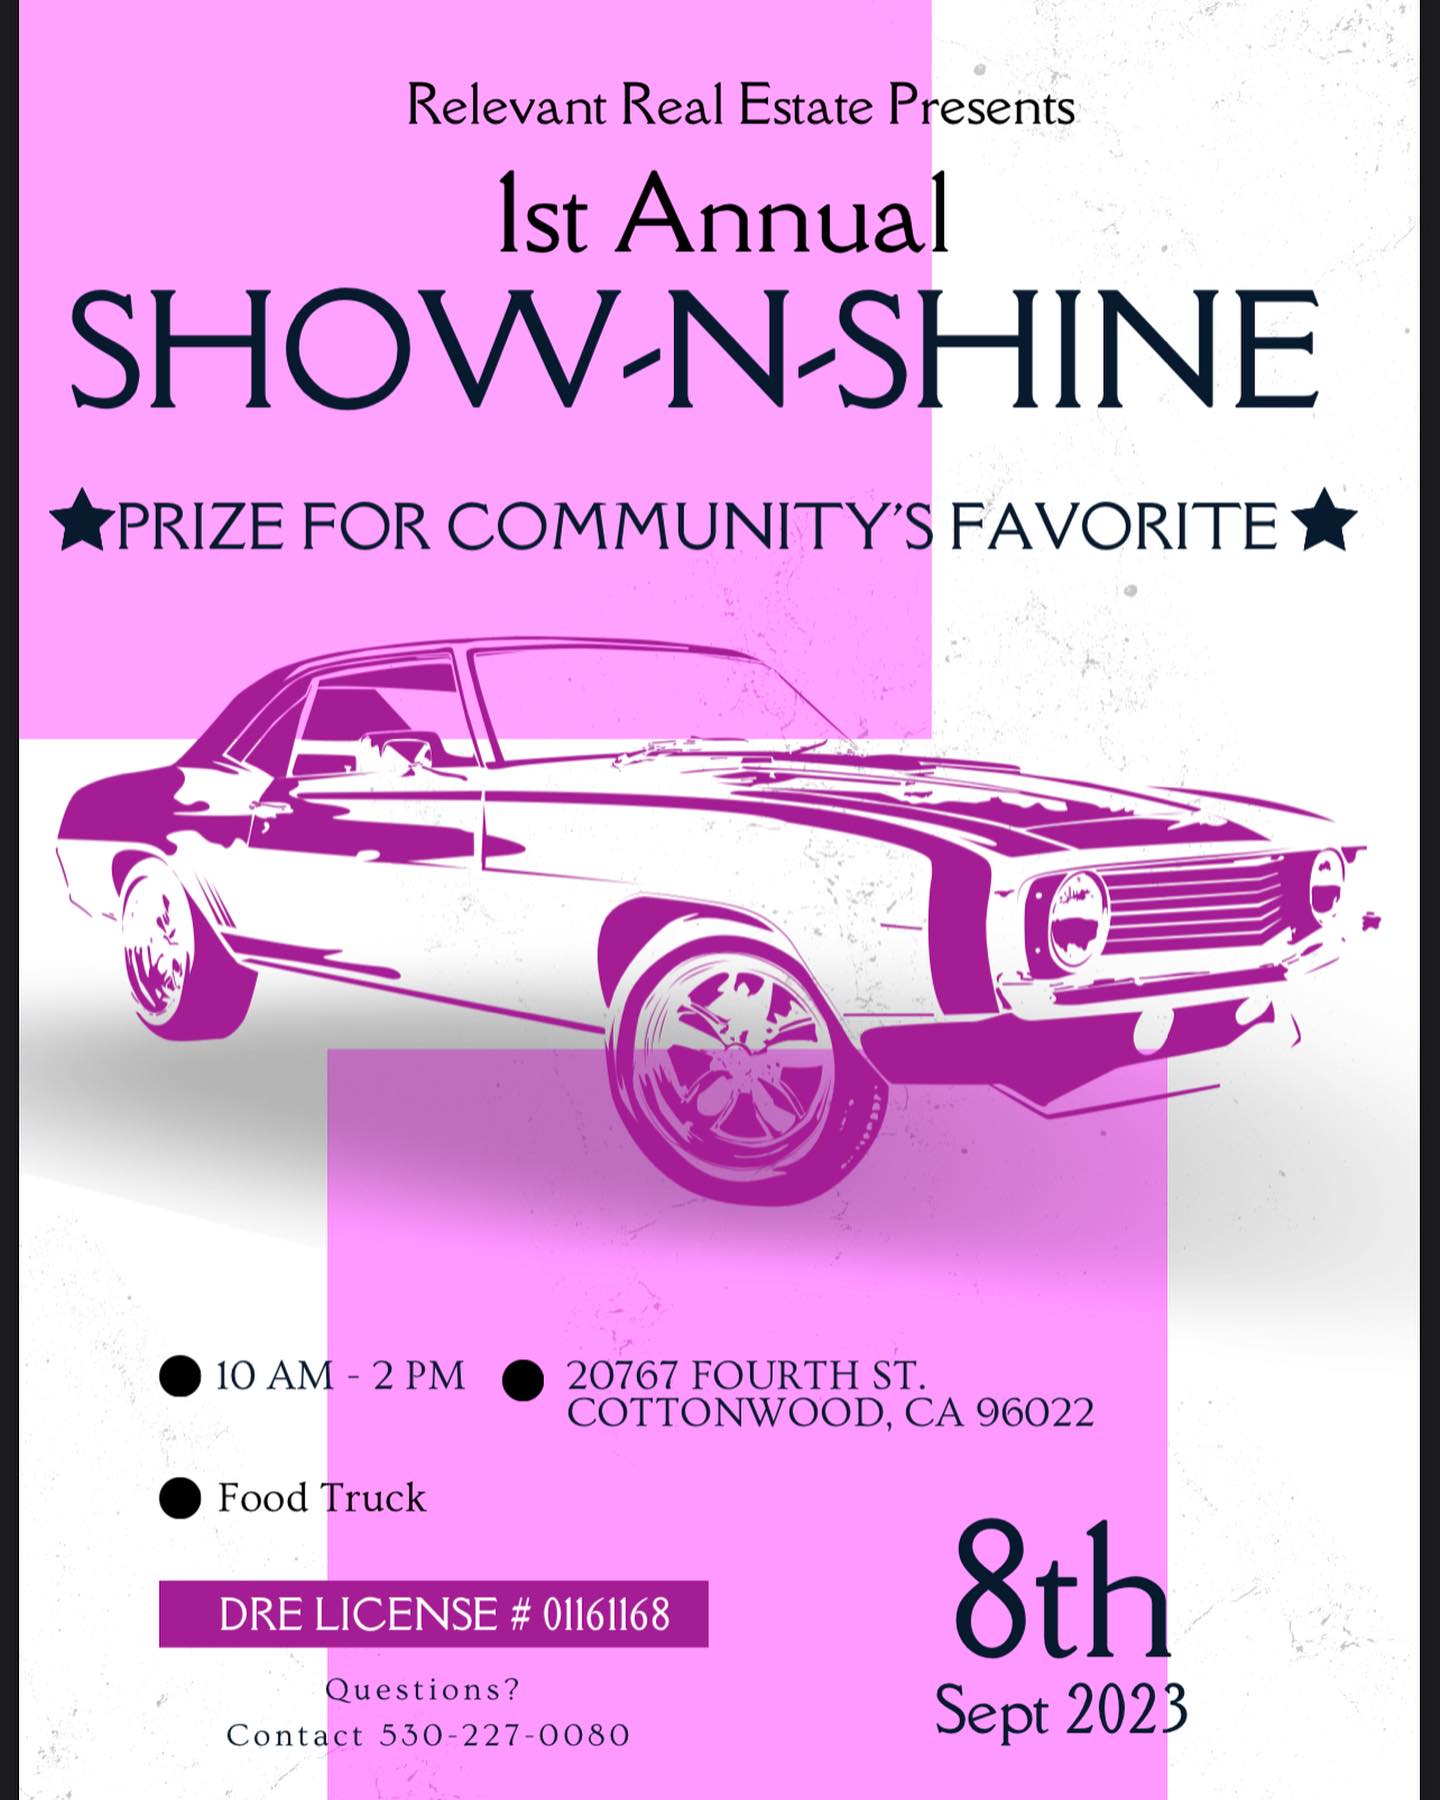 Relevant Real Estate Show-n-Shine